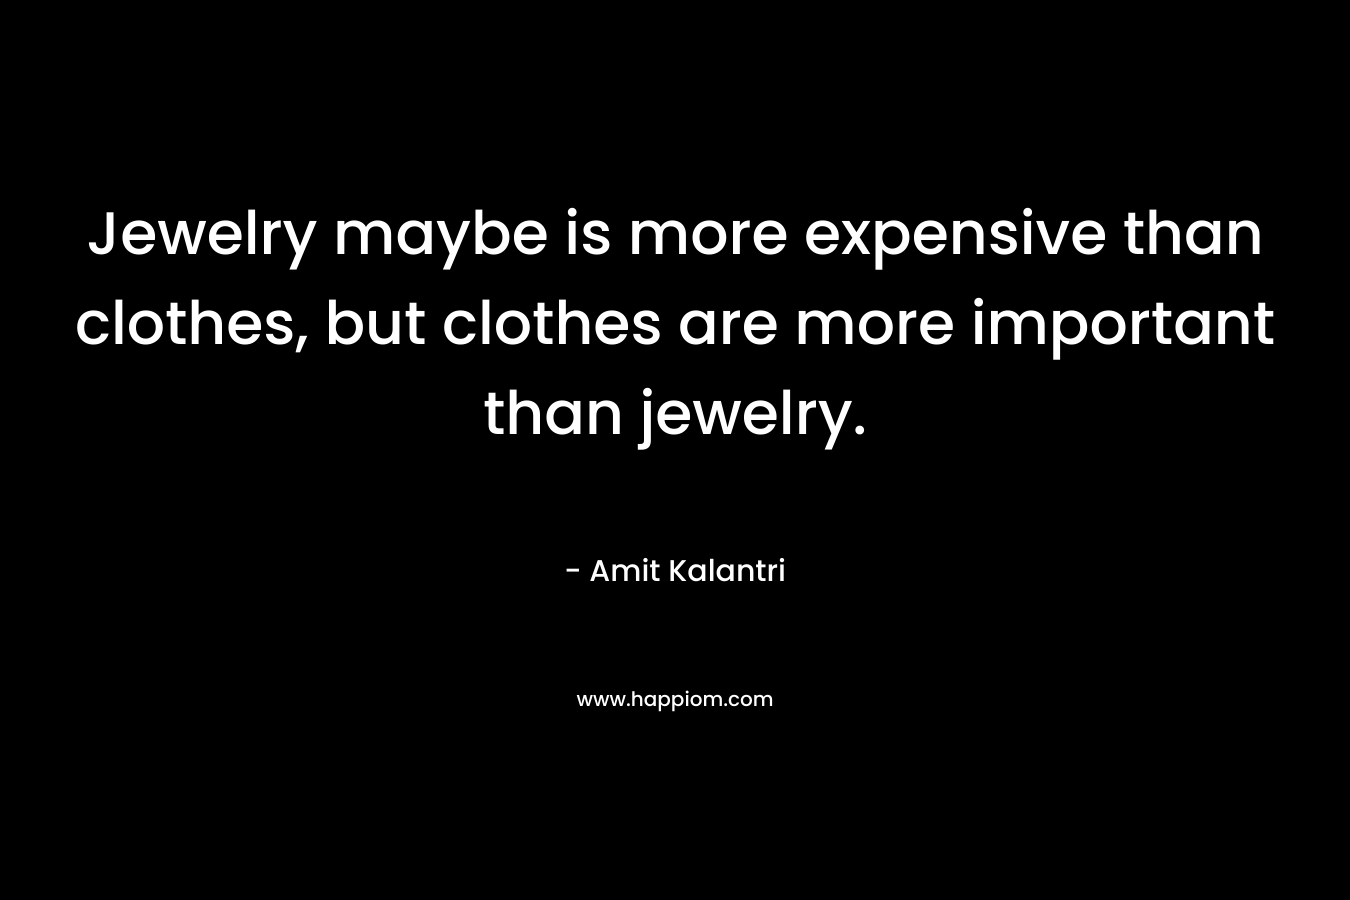 Jewelry maybe is more expensive than clothes, but clothes are more important than jewelry. – Amit Kalantri